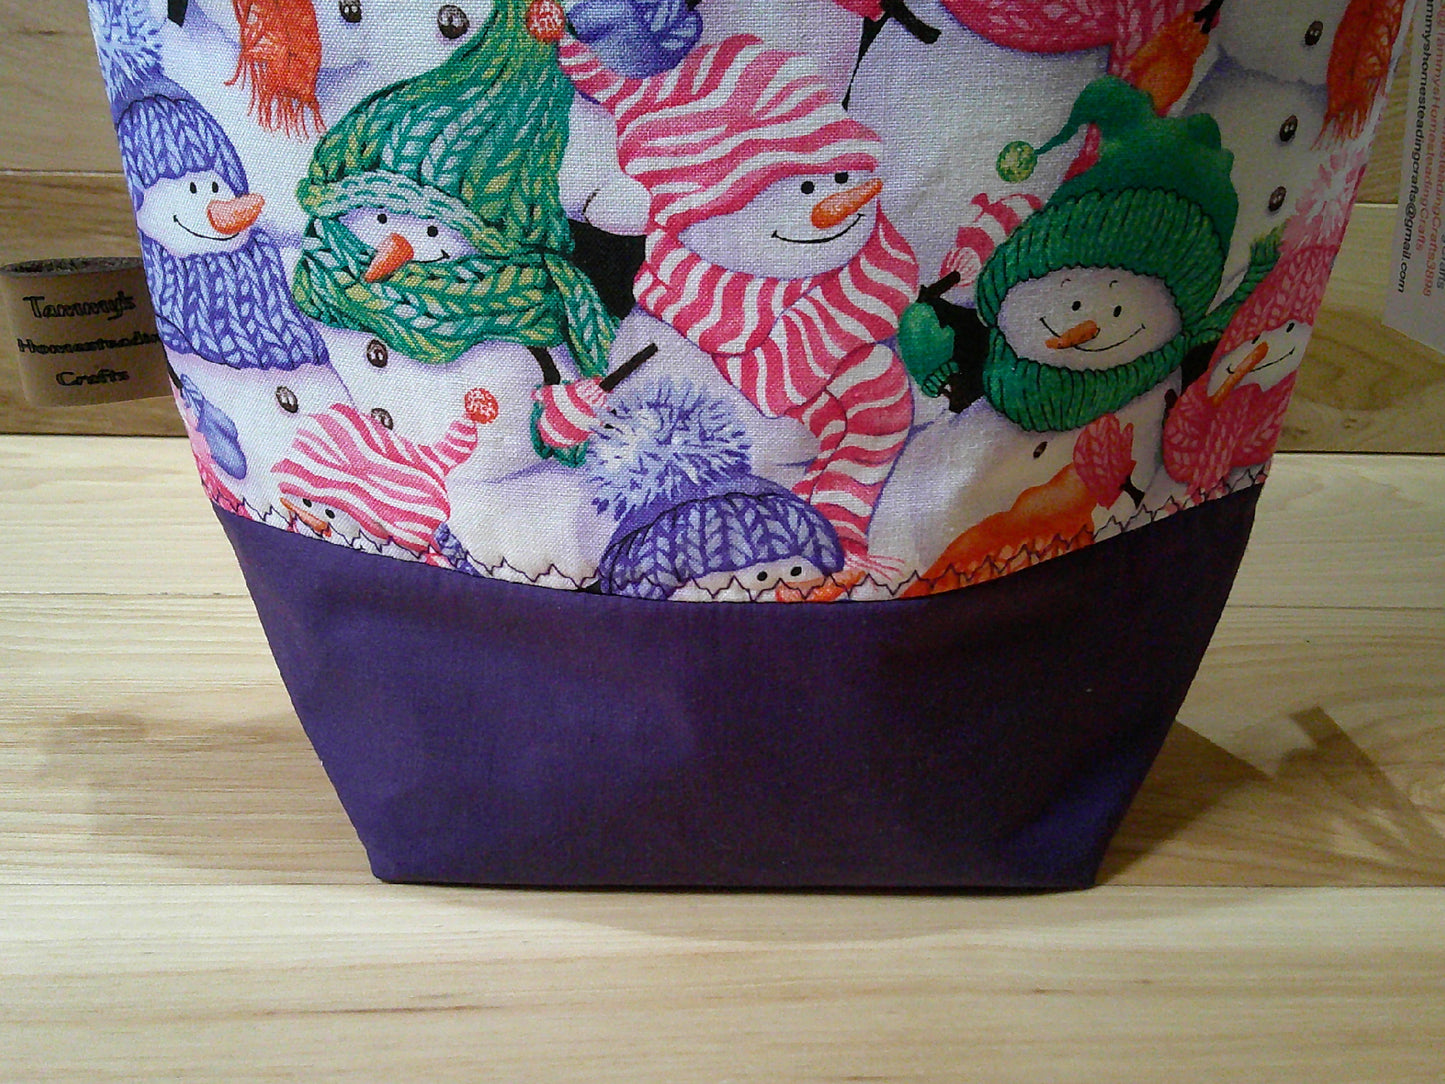 Snowman w/ colored scarves project bags